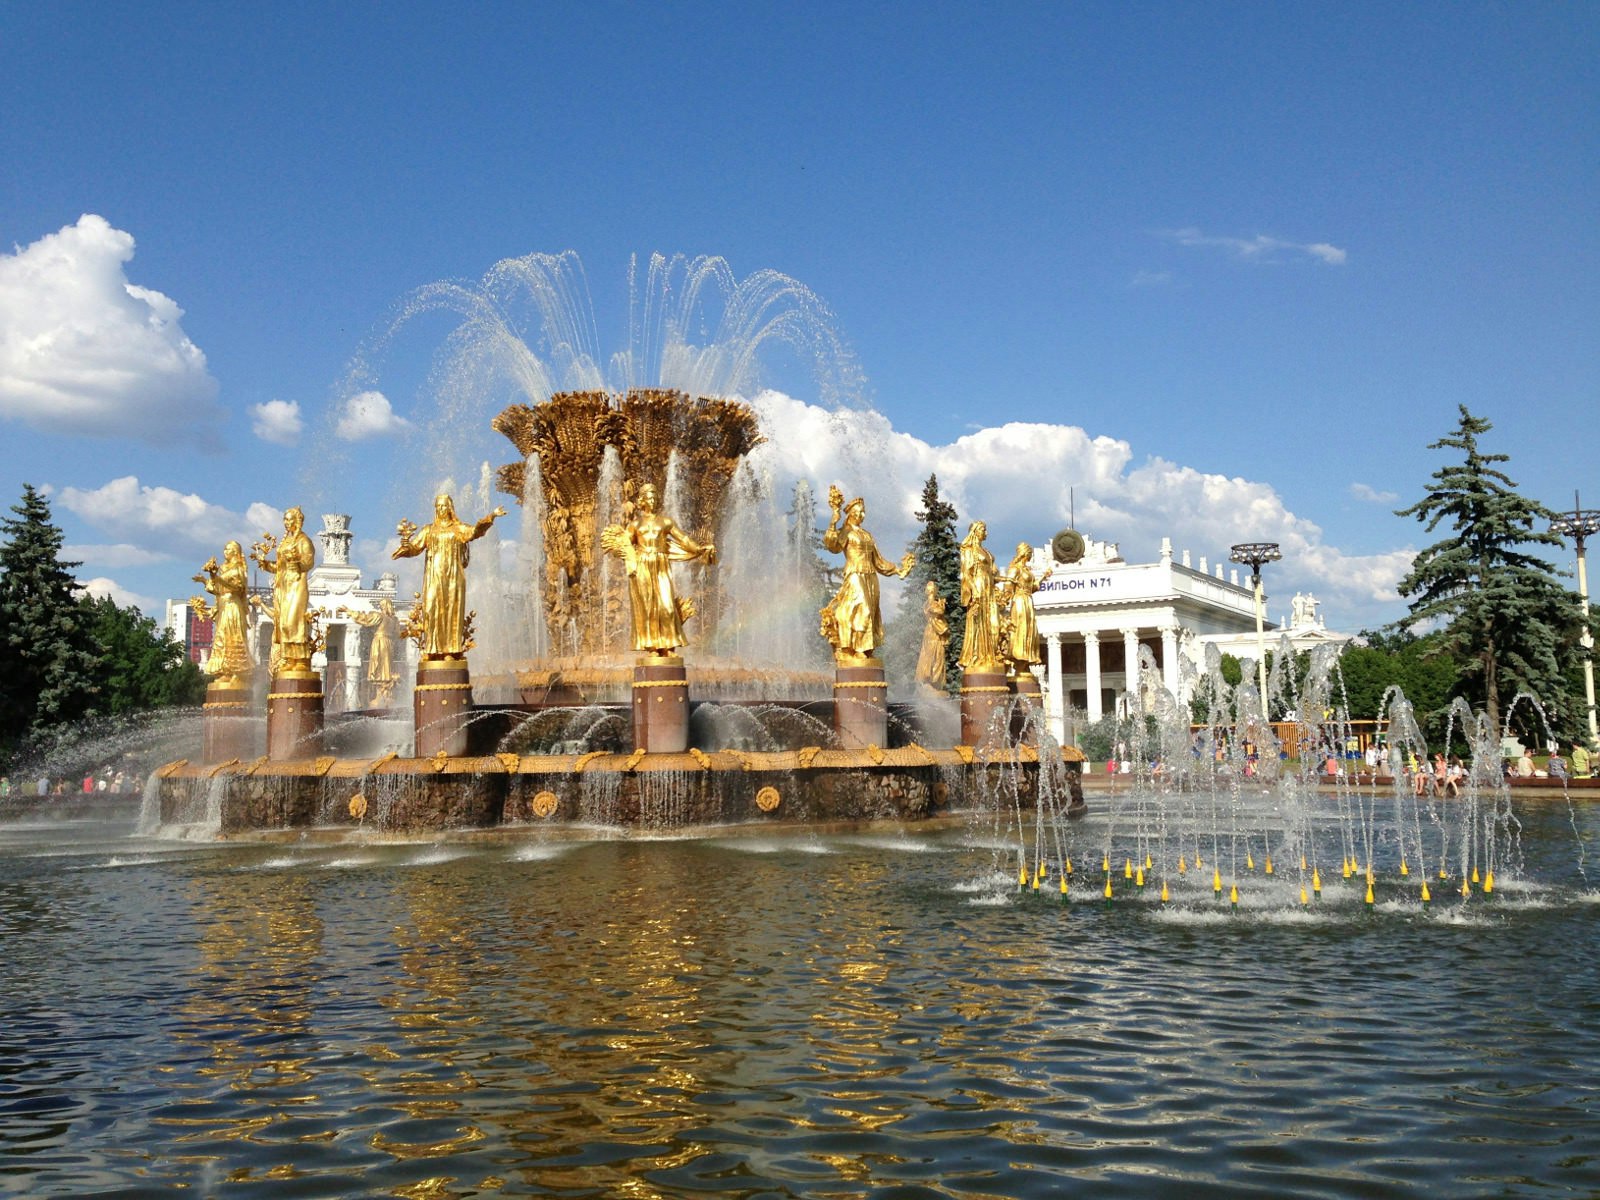 Opulent fountains and pavilions at VDNKh © Kira Tverskaya / Lonely Planet